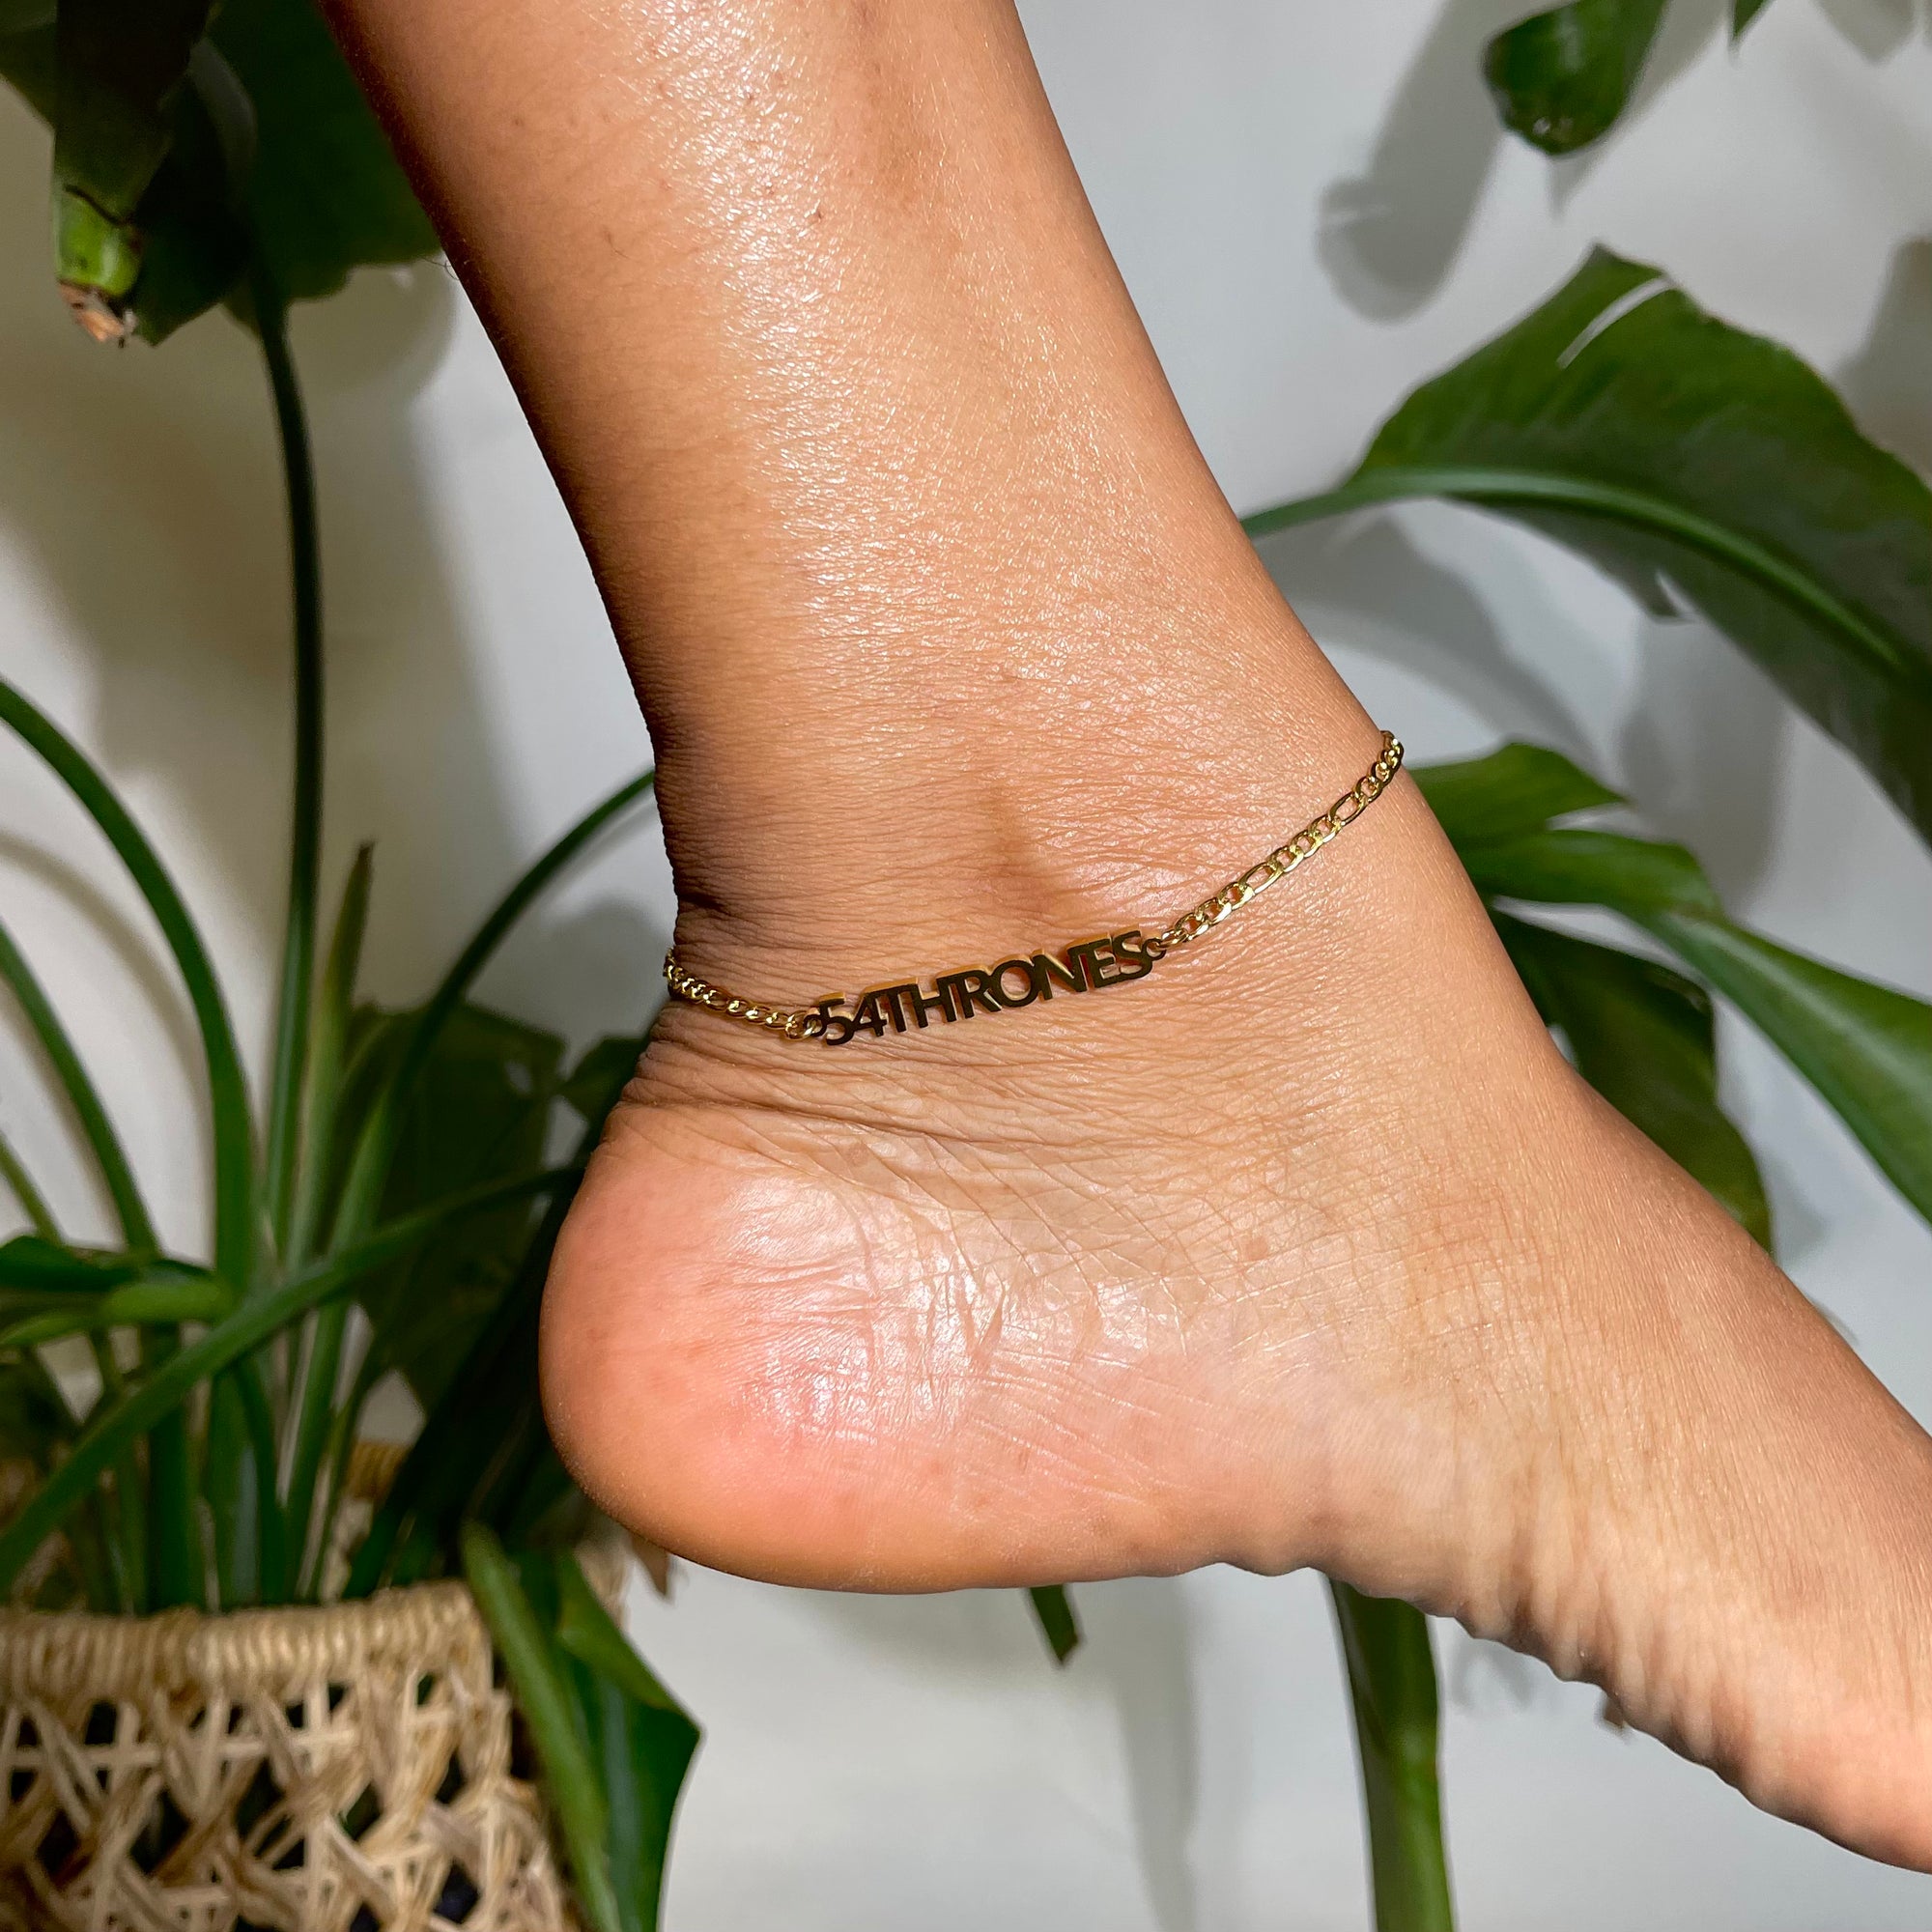 54 Thrones Anklet